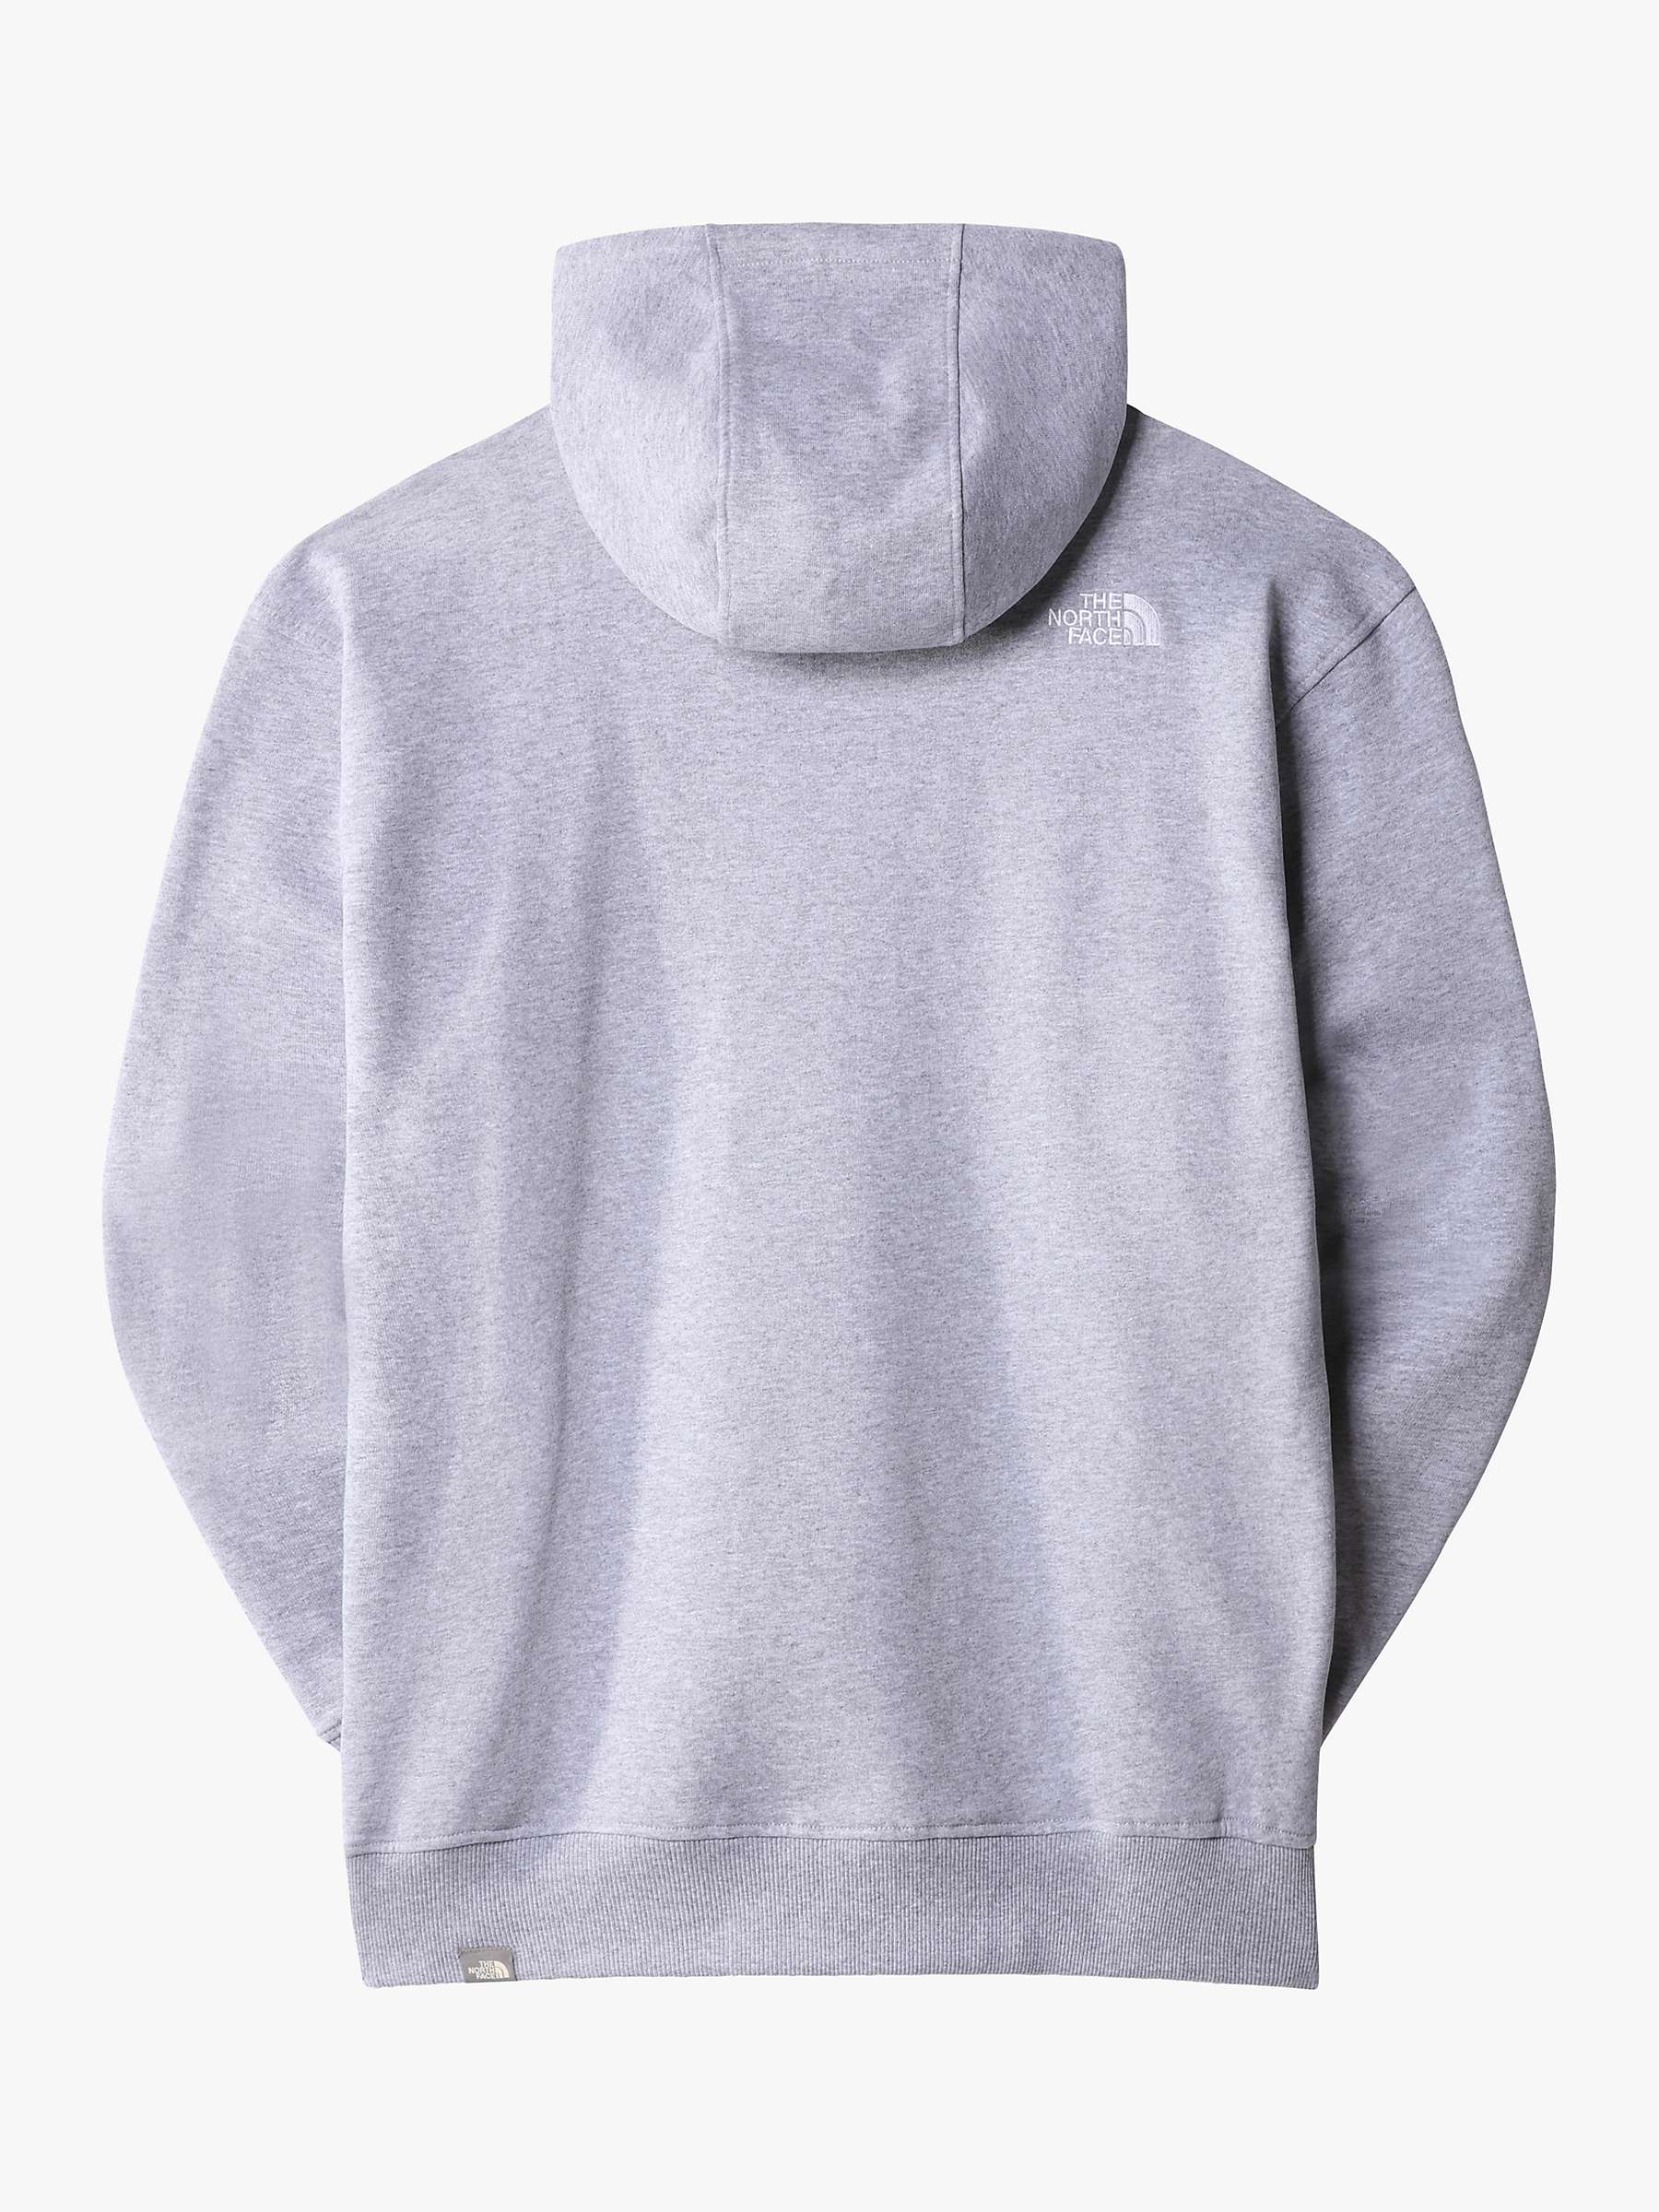 Buy The North Face Essential Relaxed Fit Hoodie, Light Grey Heather Online at johnlewis.com